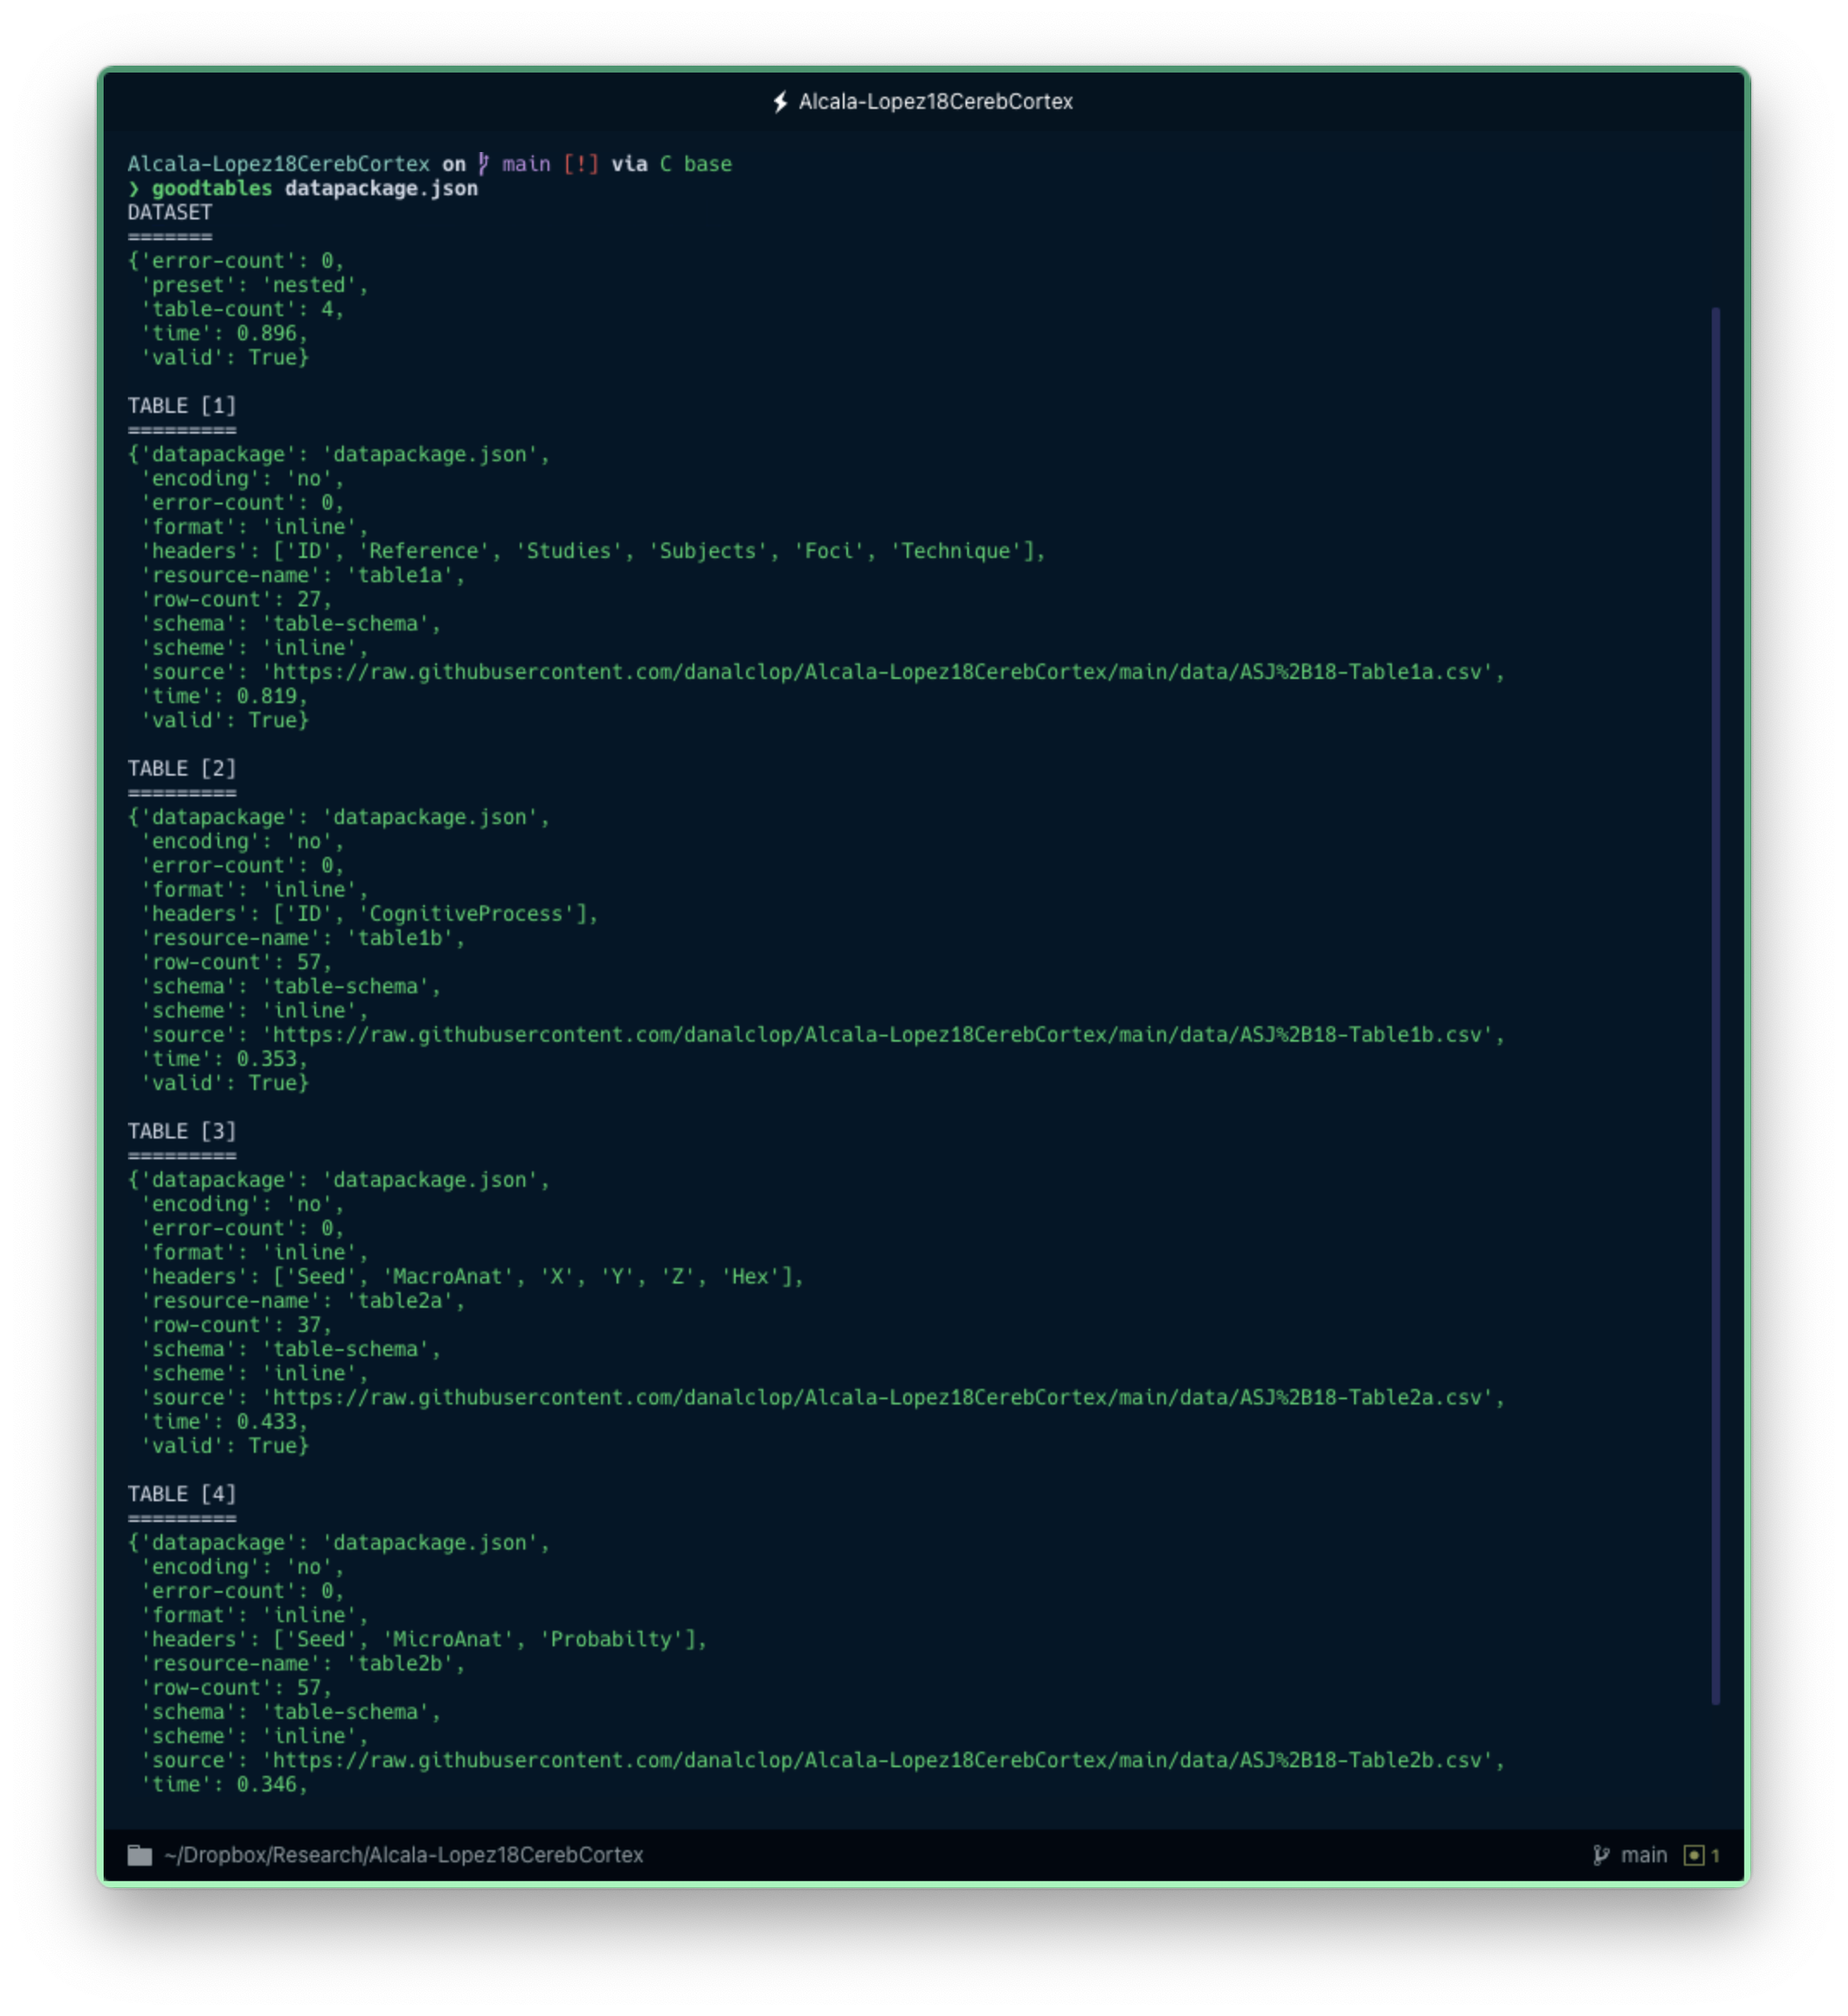 Output from the 'goodtables' command-line tool